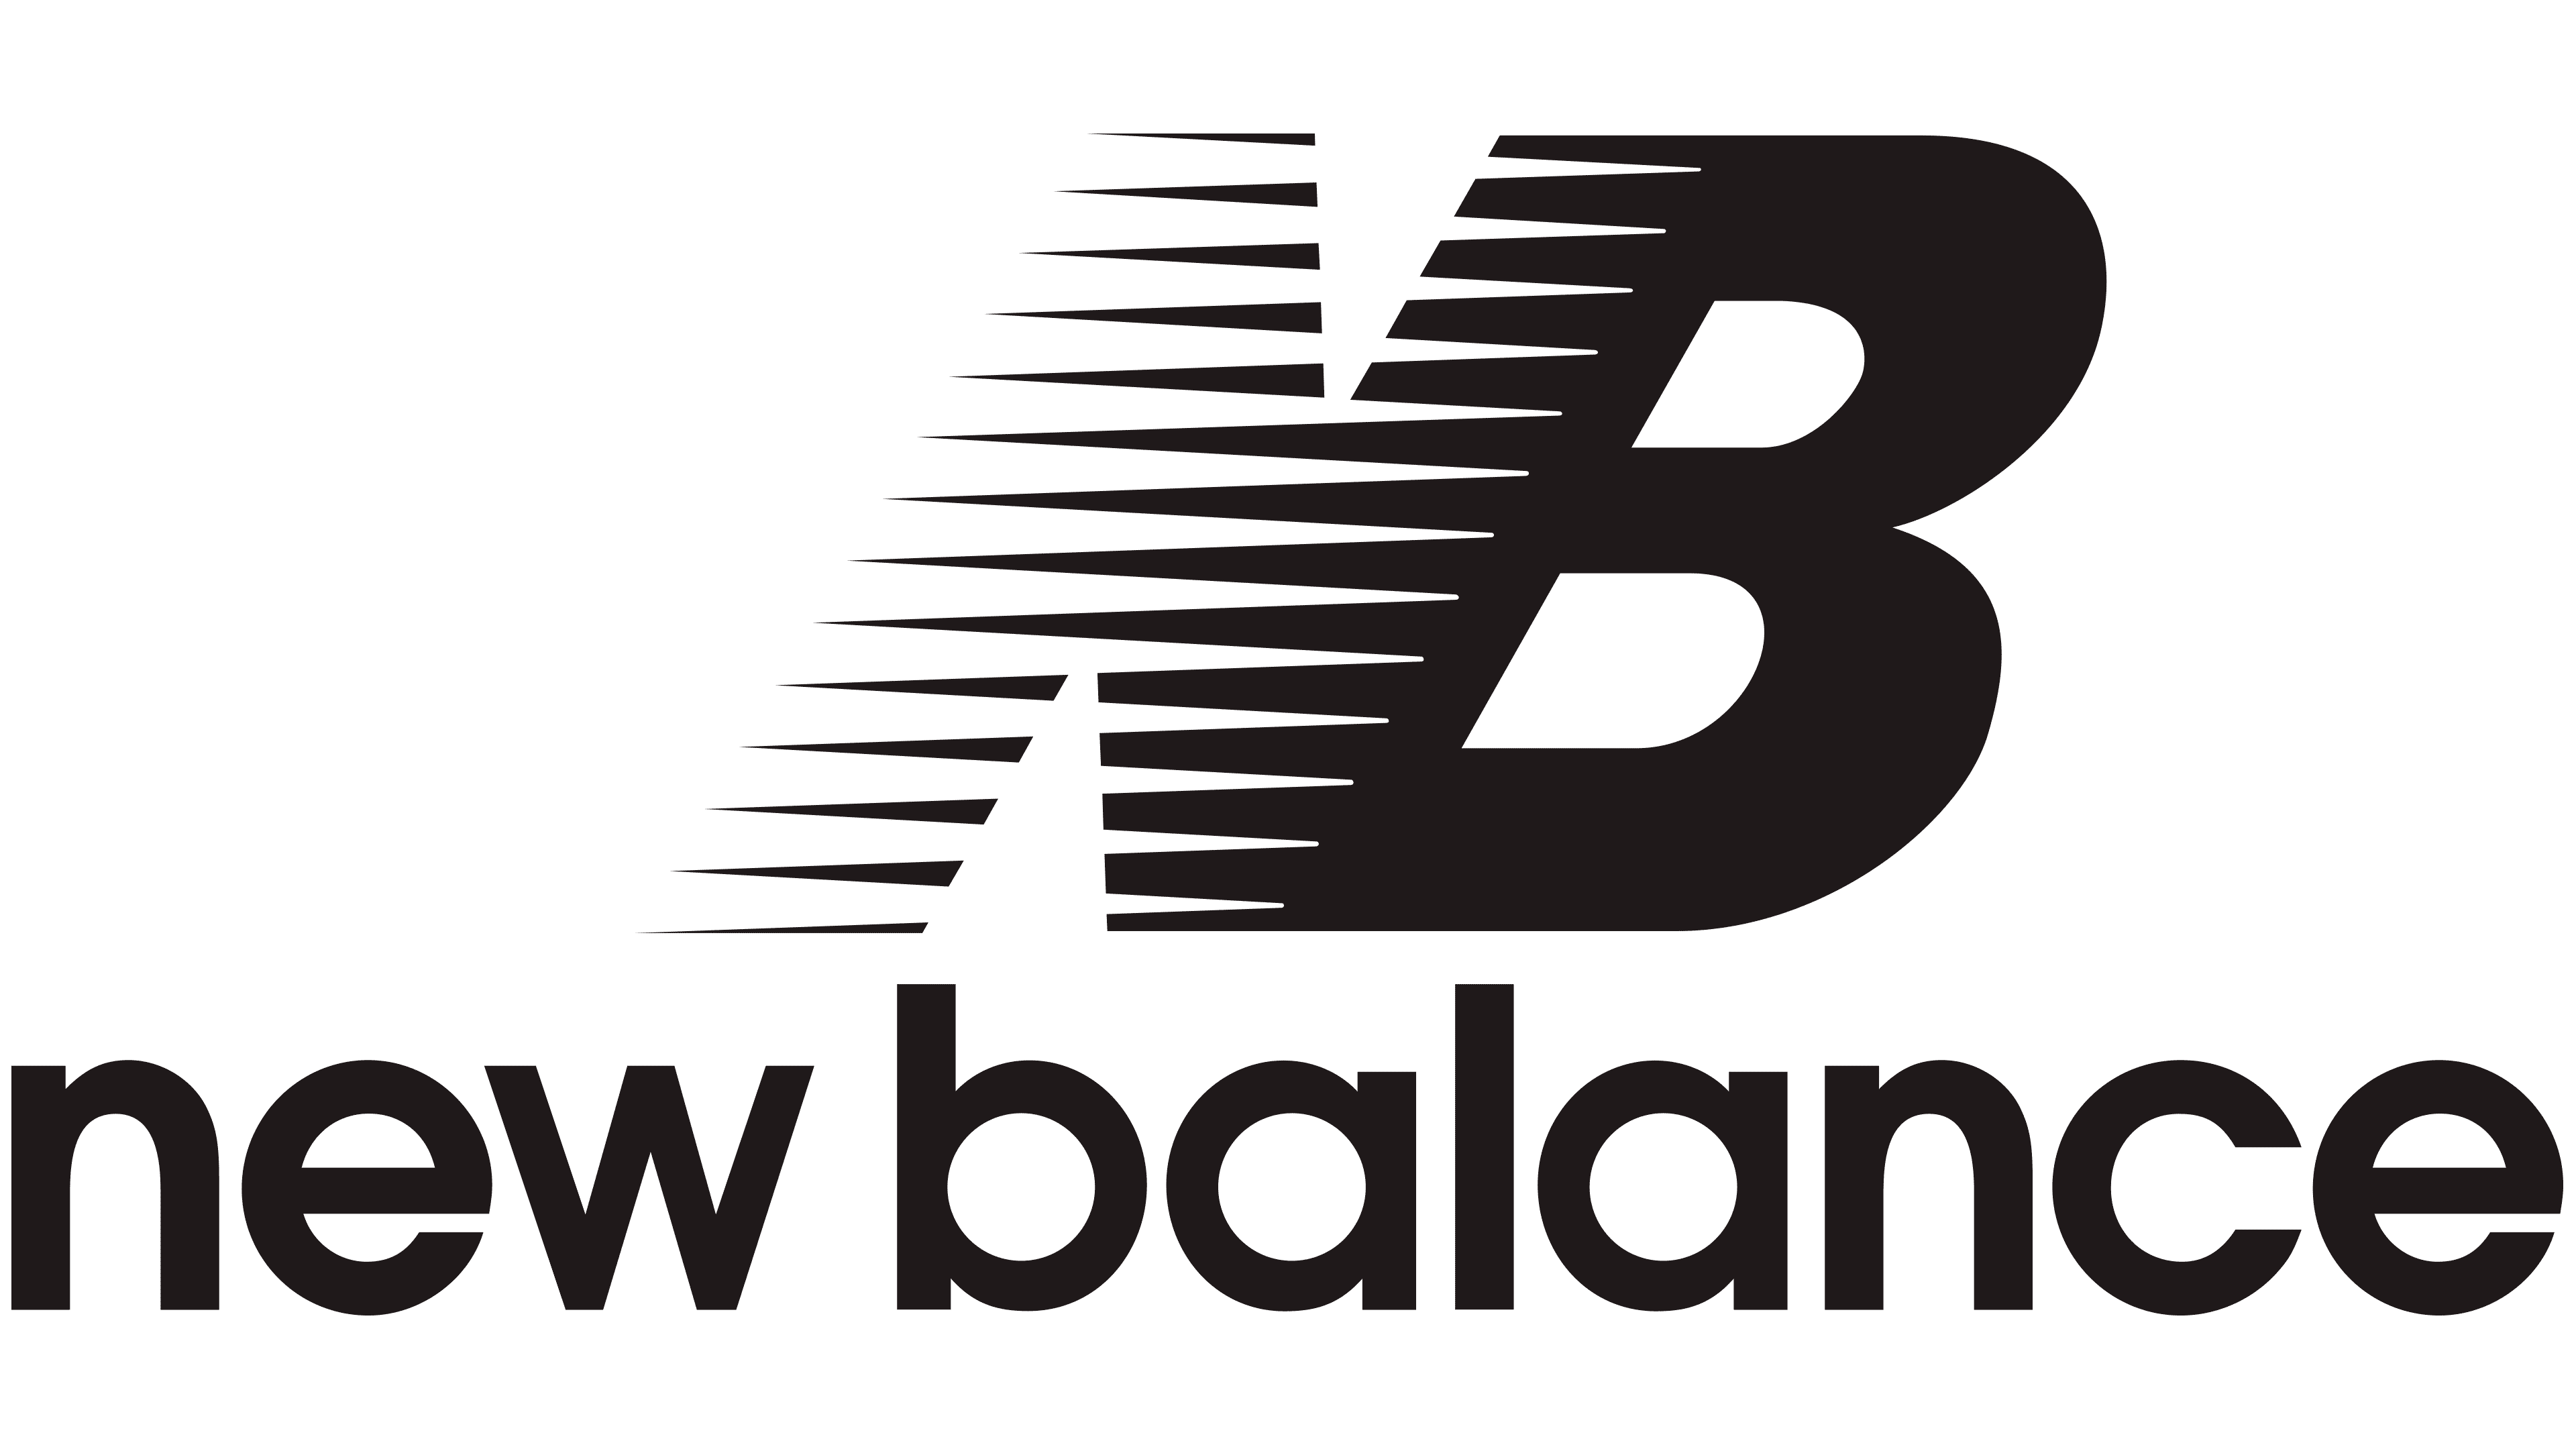 The New Balance logo reads "new balance" with a stylized "NB" above it.